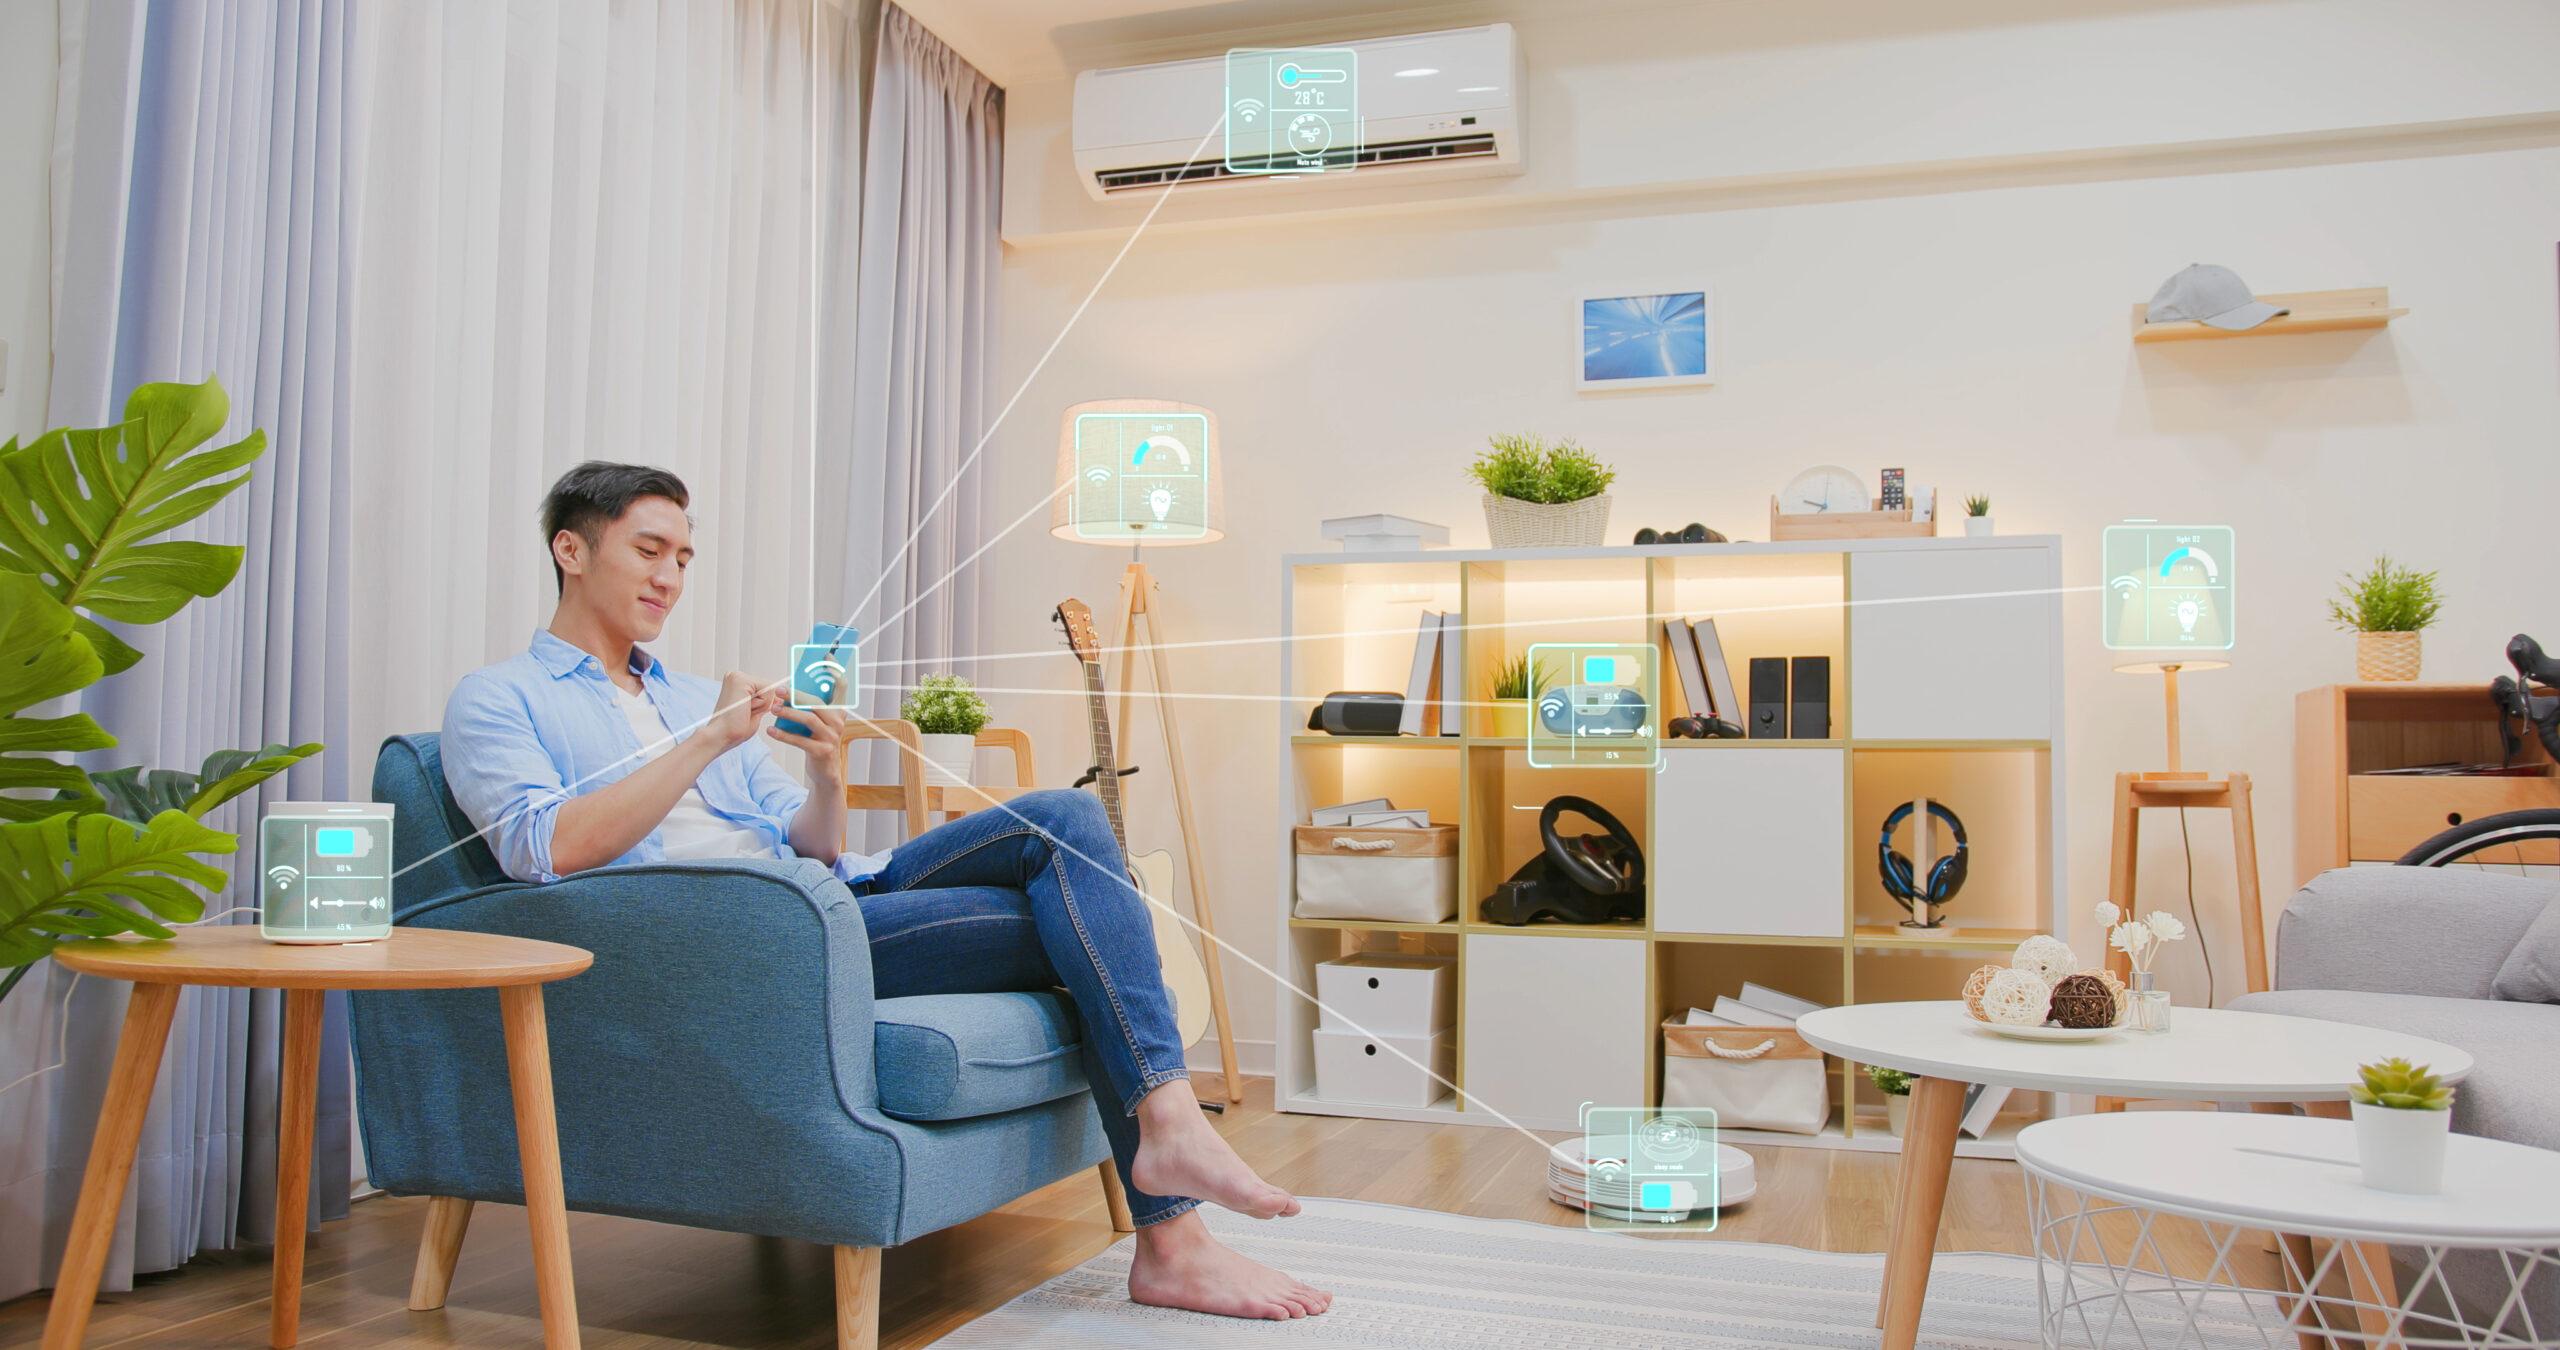 Contact HomeTech by Mosaic today to connect your home and make life easier